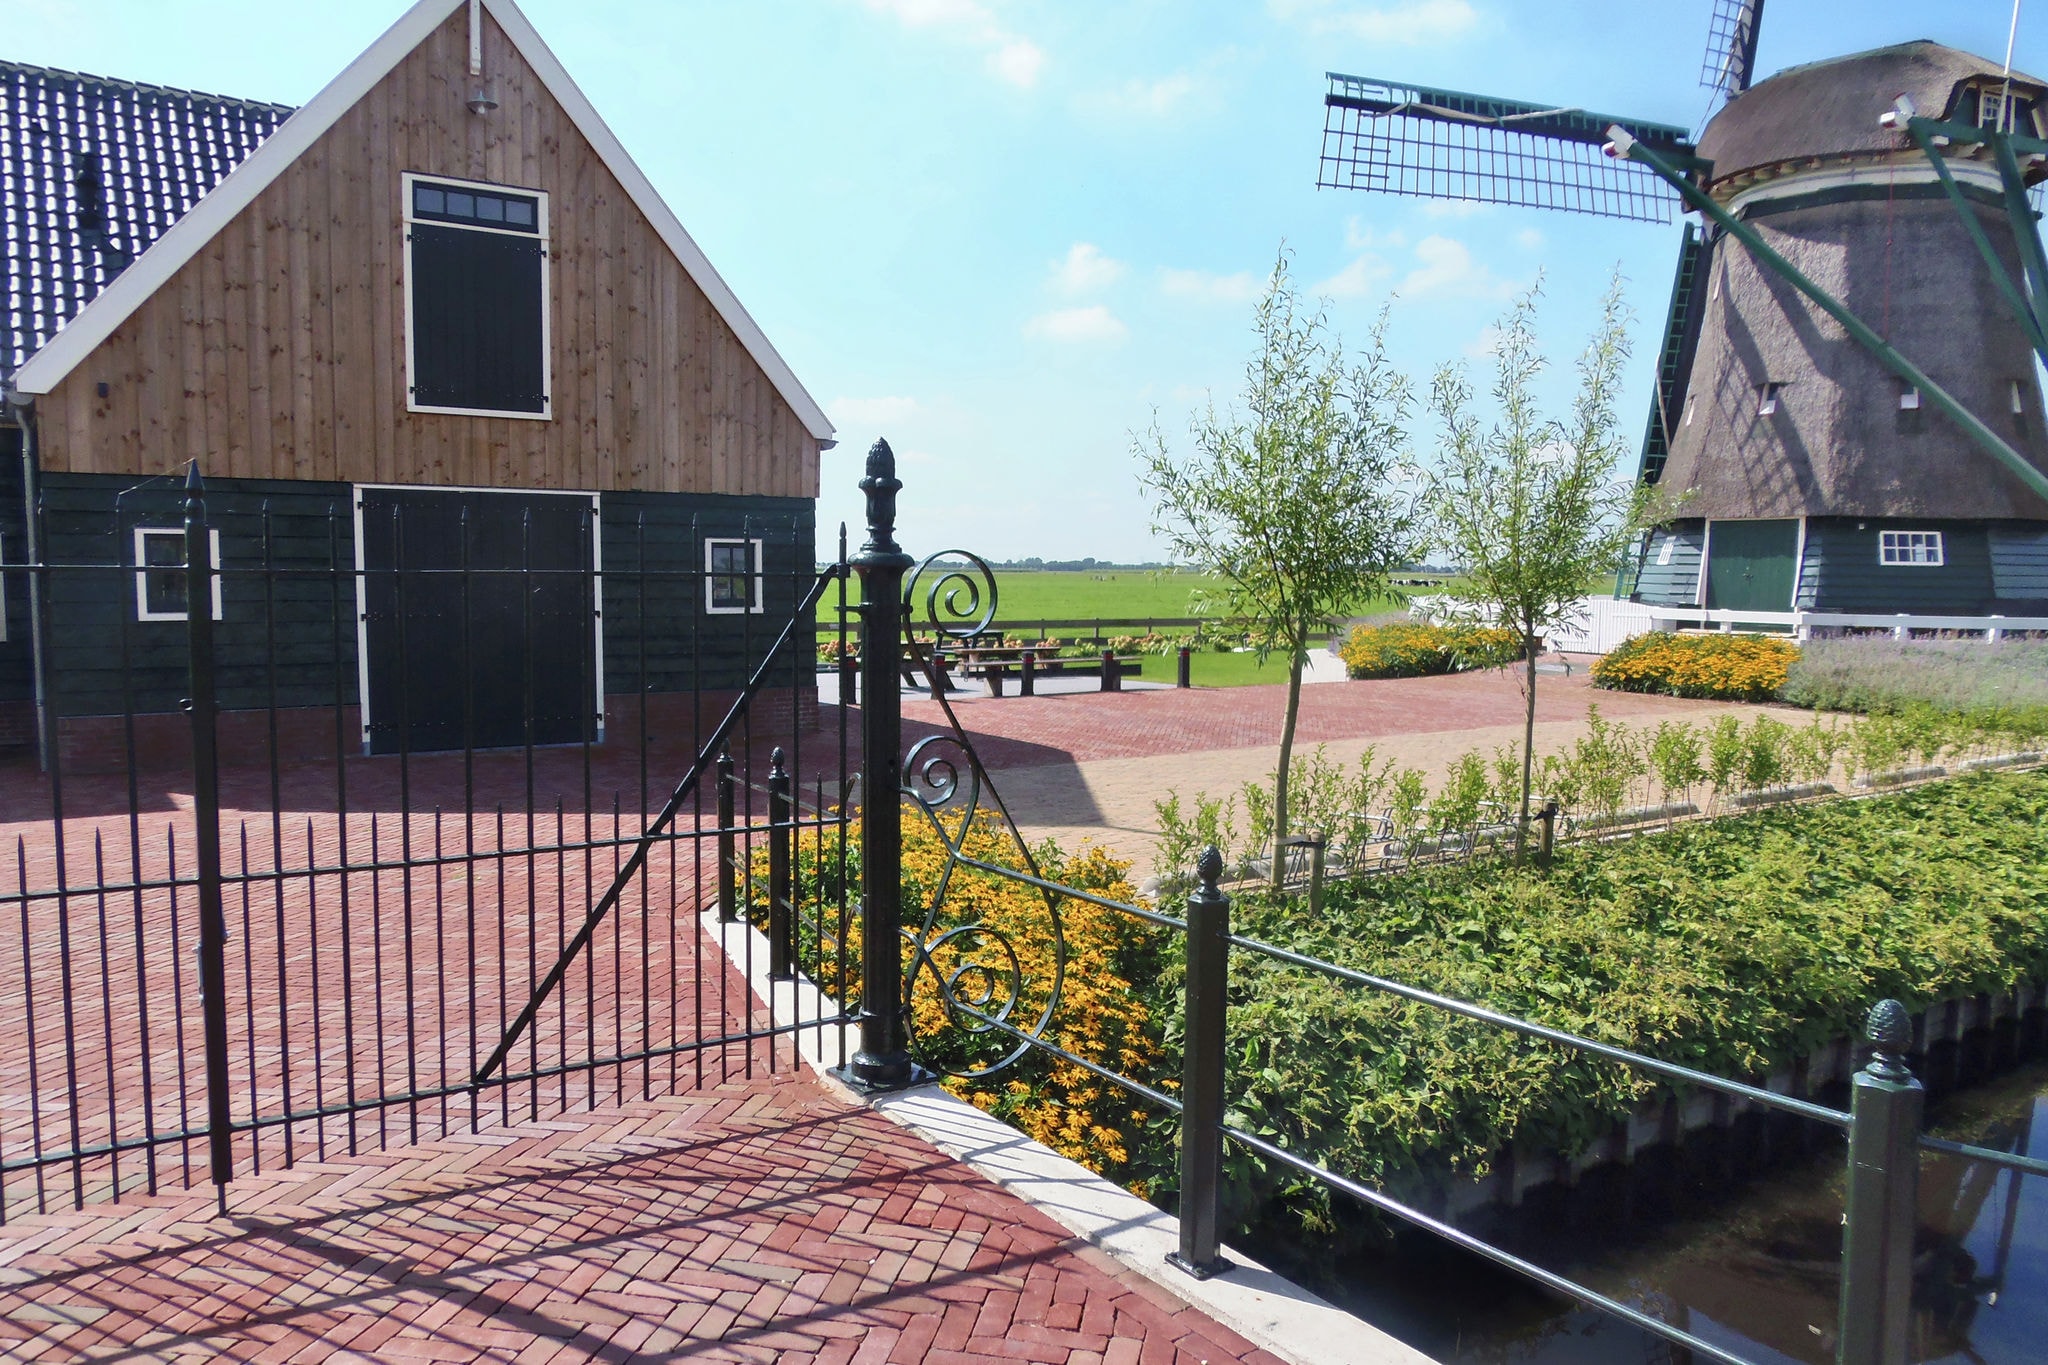 Holiday home in Beemster near a windmill